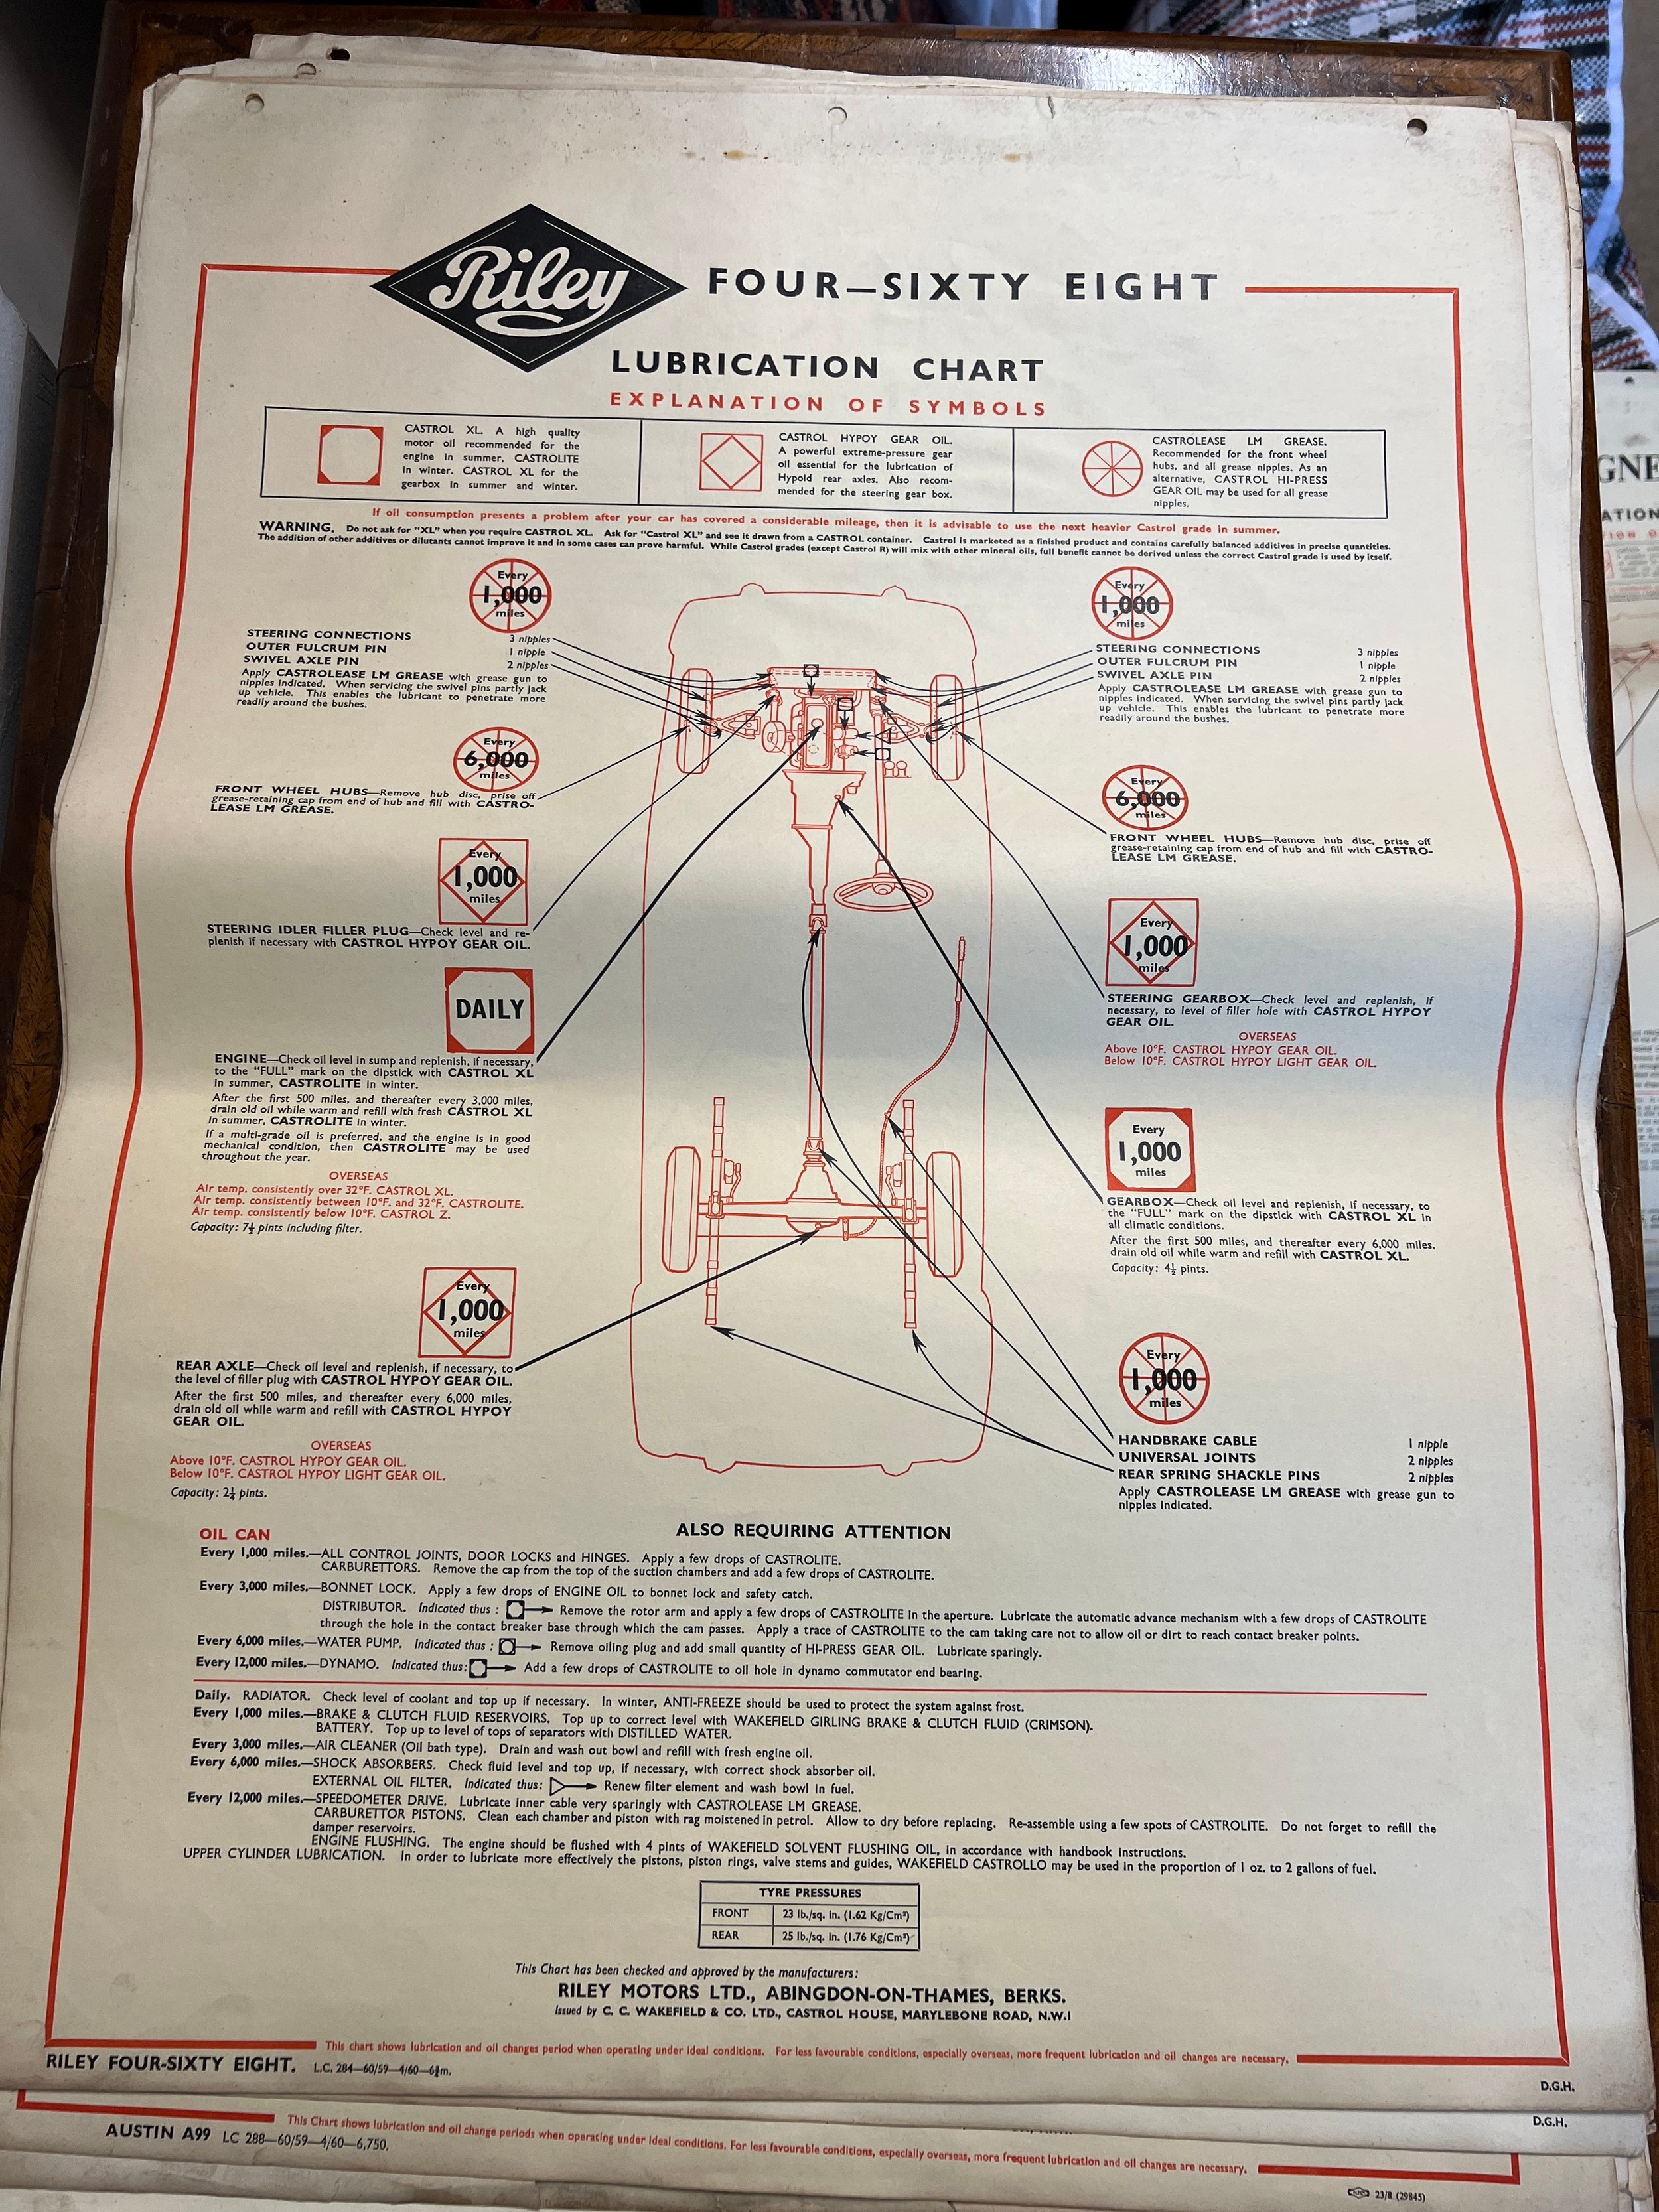 Thirty one vintage car lubrication charts to include Wolseley, Morris, MG 1100, Morris 1100, - Image 14 of 31